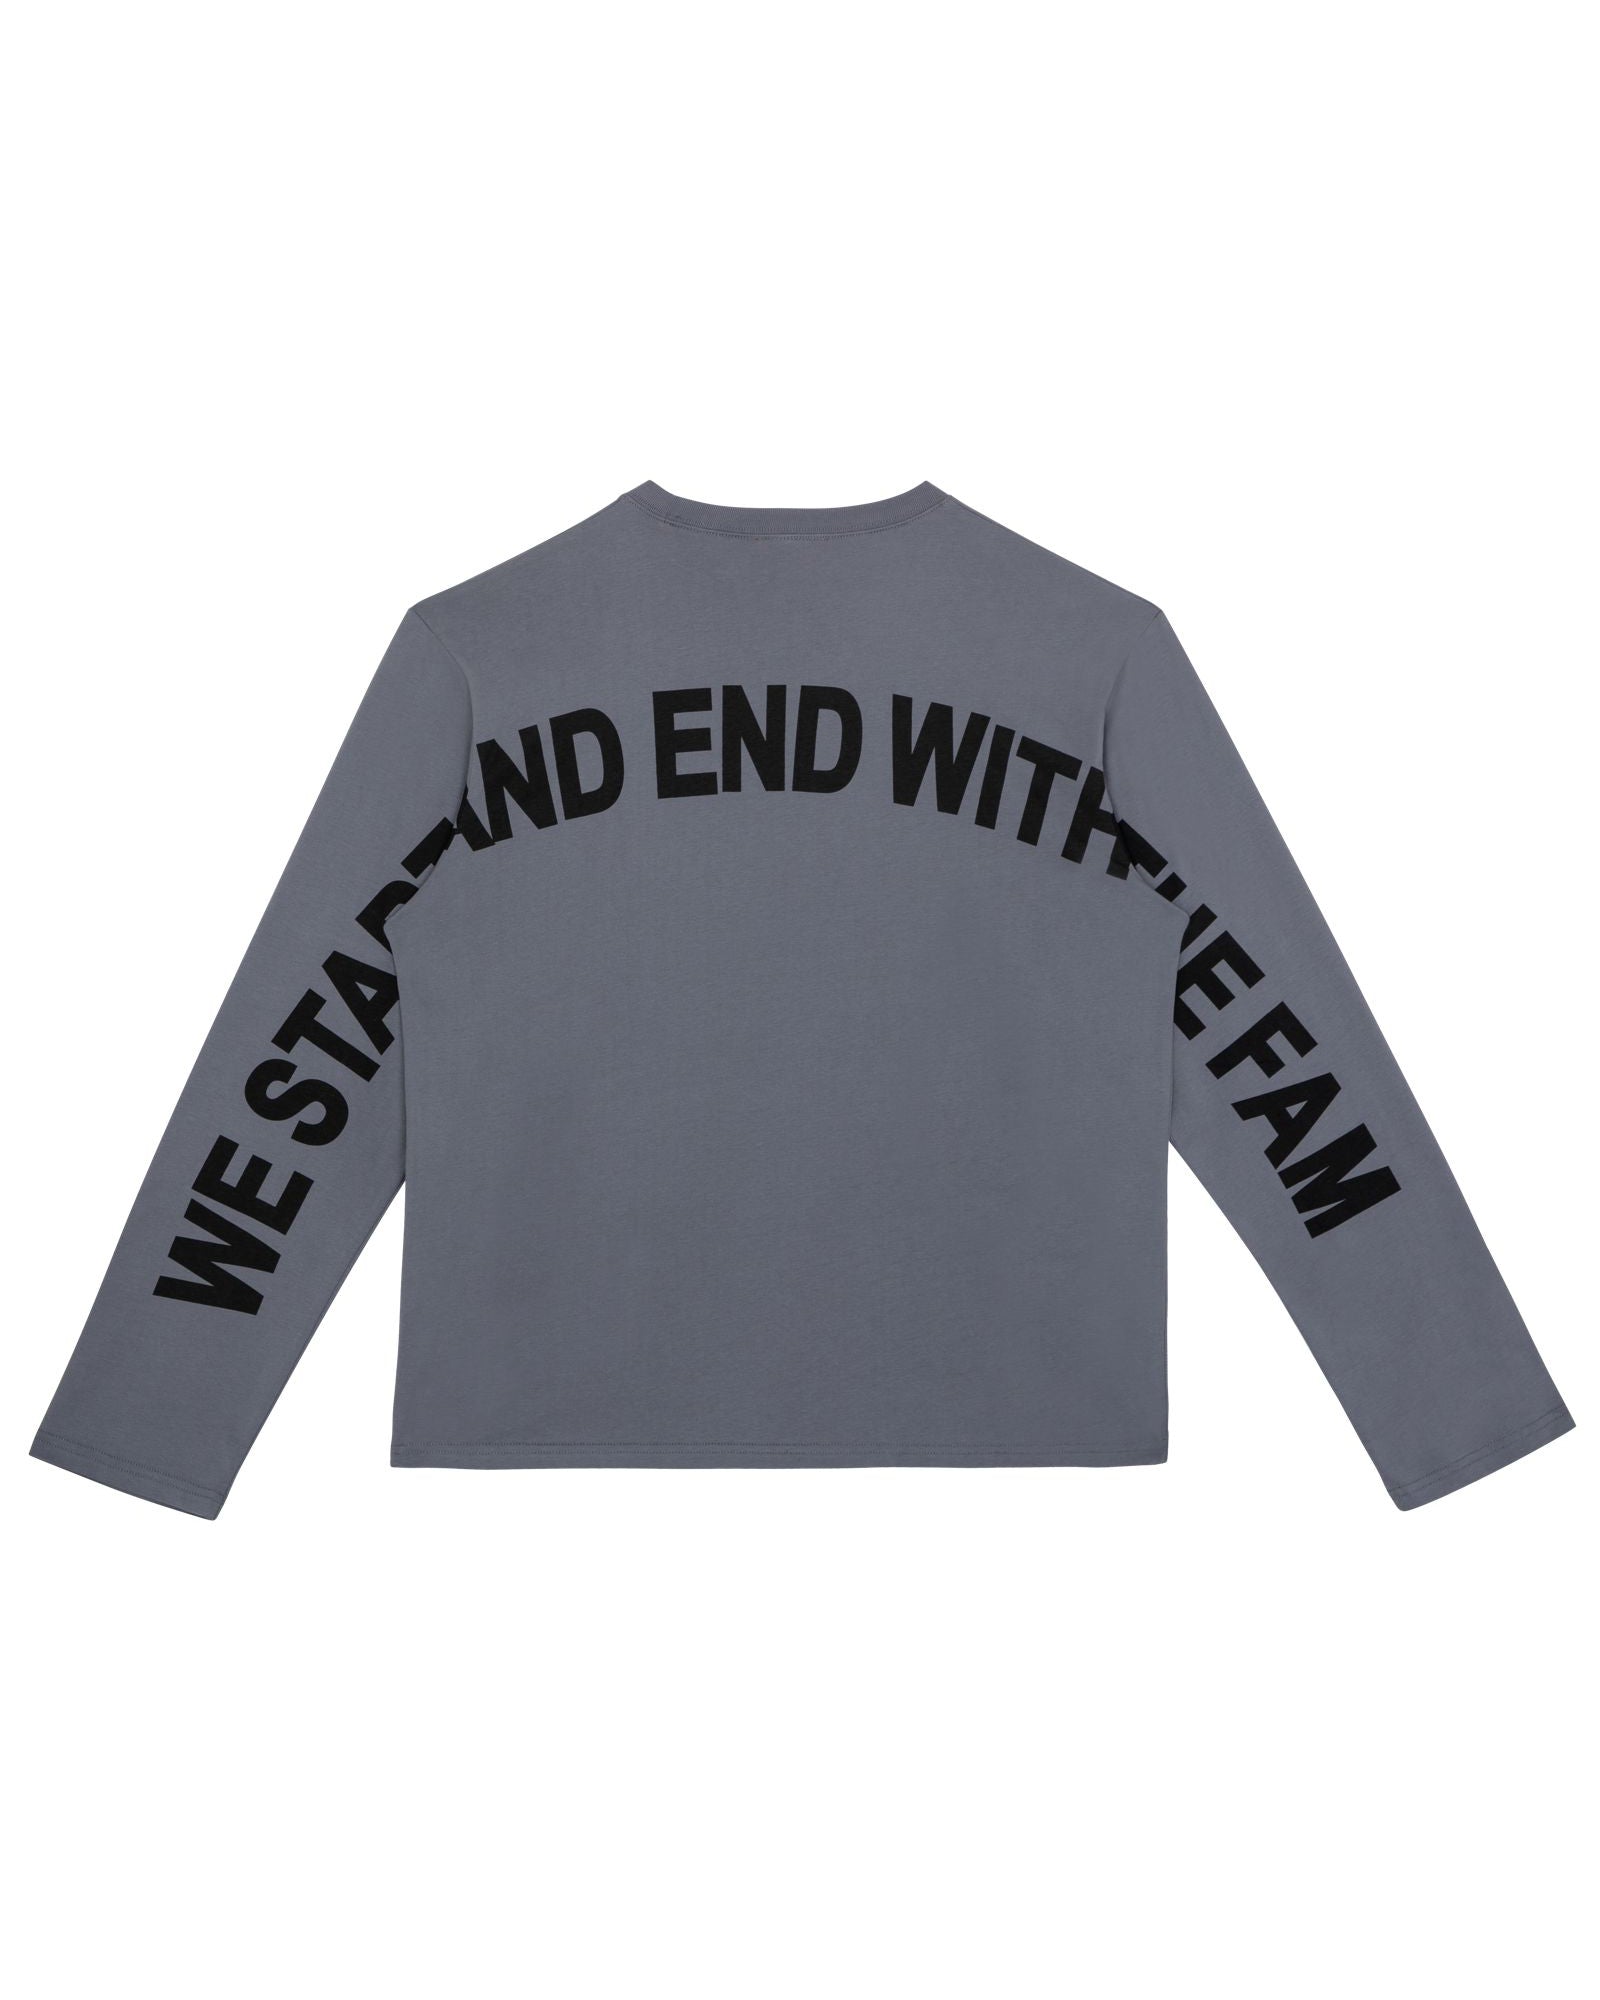 we start and end with the fam long sleeve grey